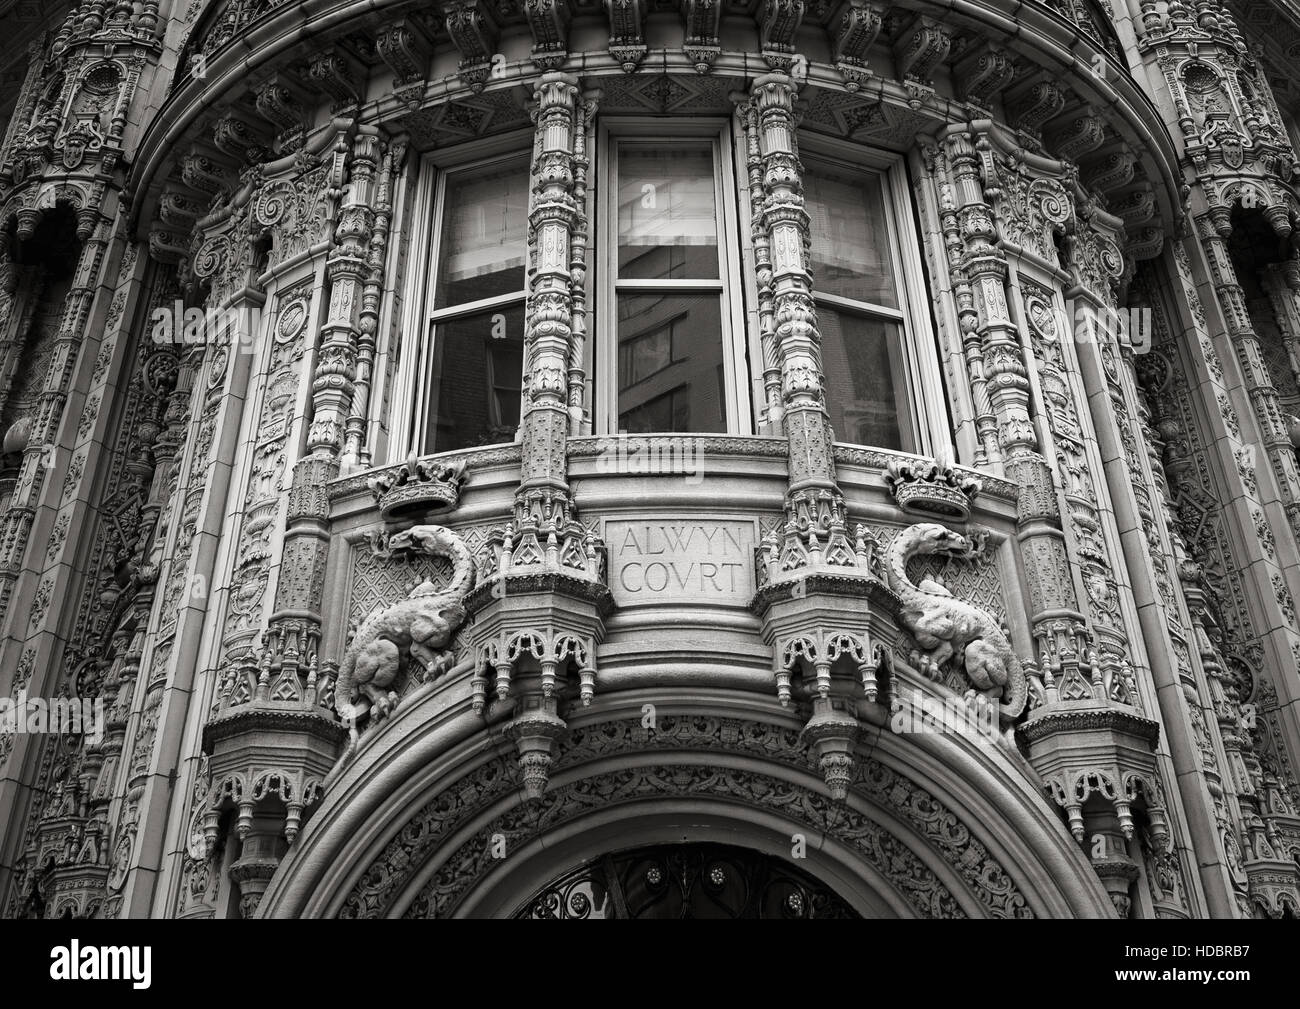 Magnificent architectural ornaments of the Alwyn Court building facade. Black and White, New York City. Stock Photo